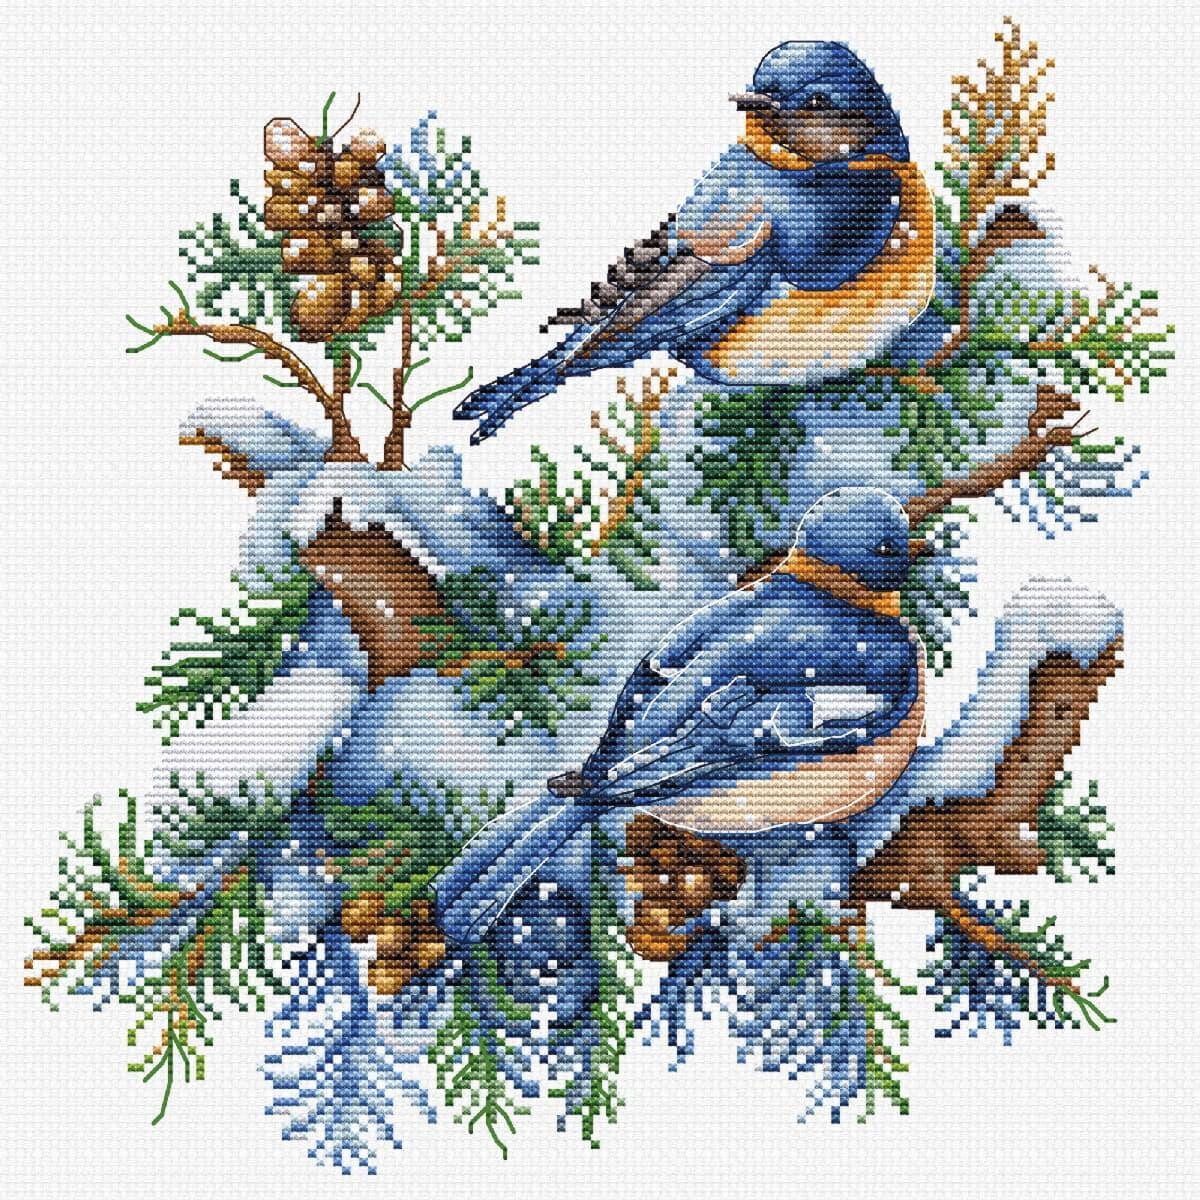 This cross stitch pattern shows two blue and orange birds...